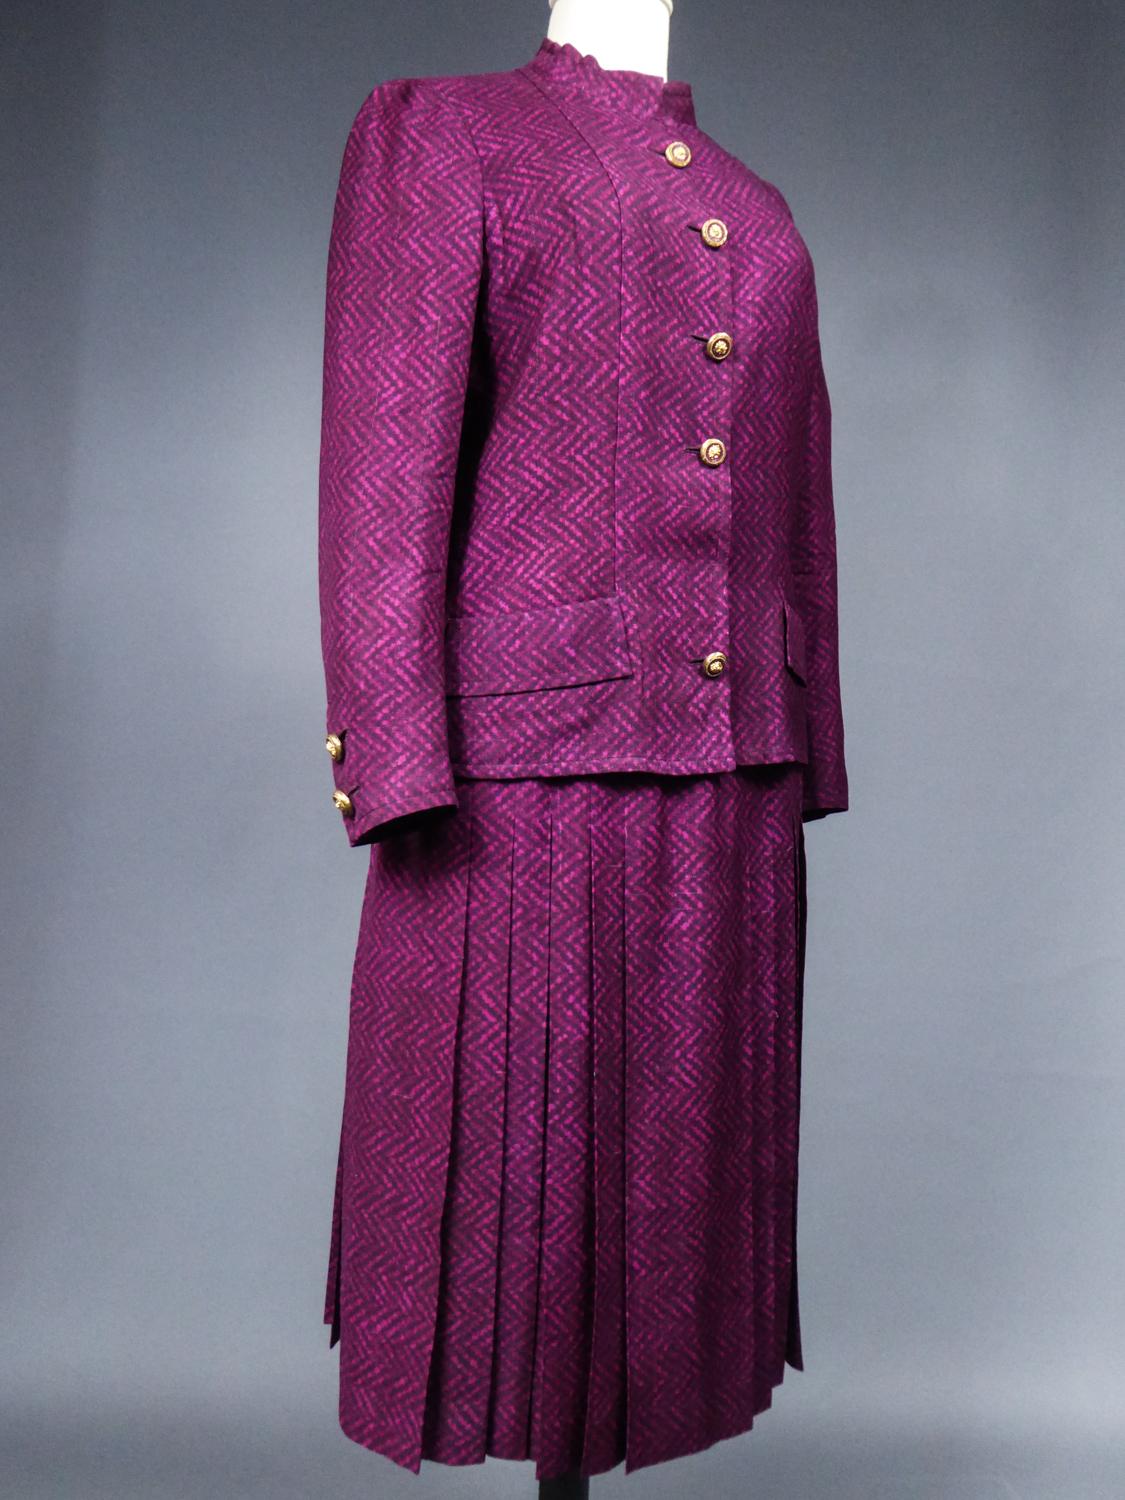 A French Couture Silk Chanel Skirt and Jacket Suit number 60423 & 60422 C. 1980 For Sale 2